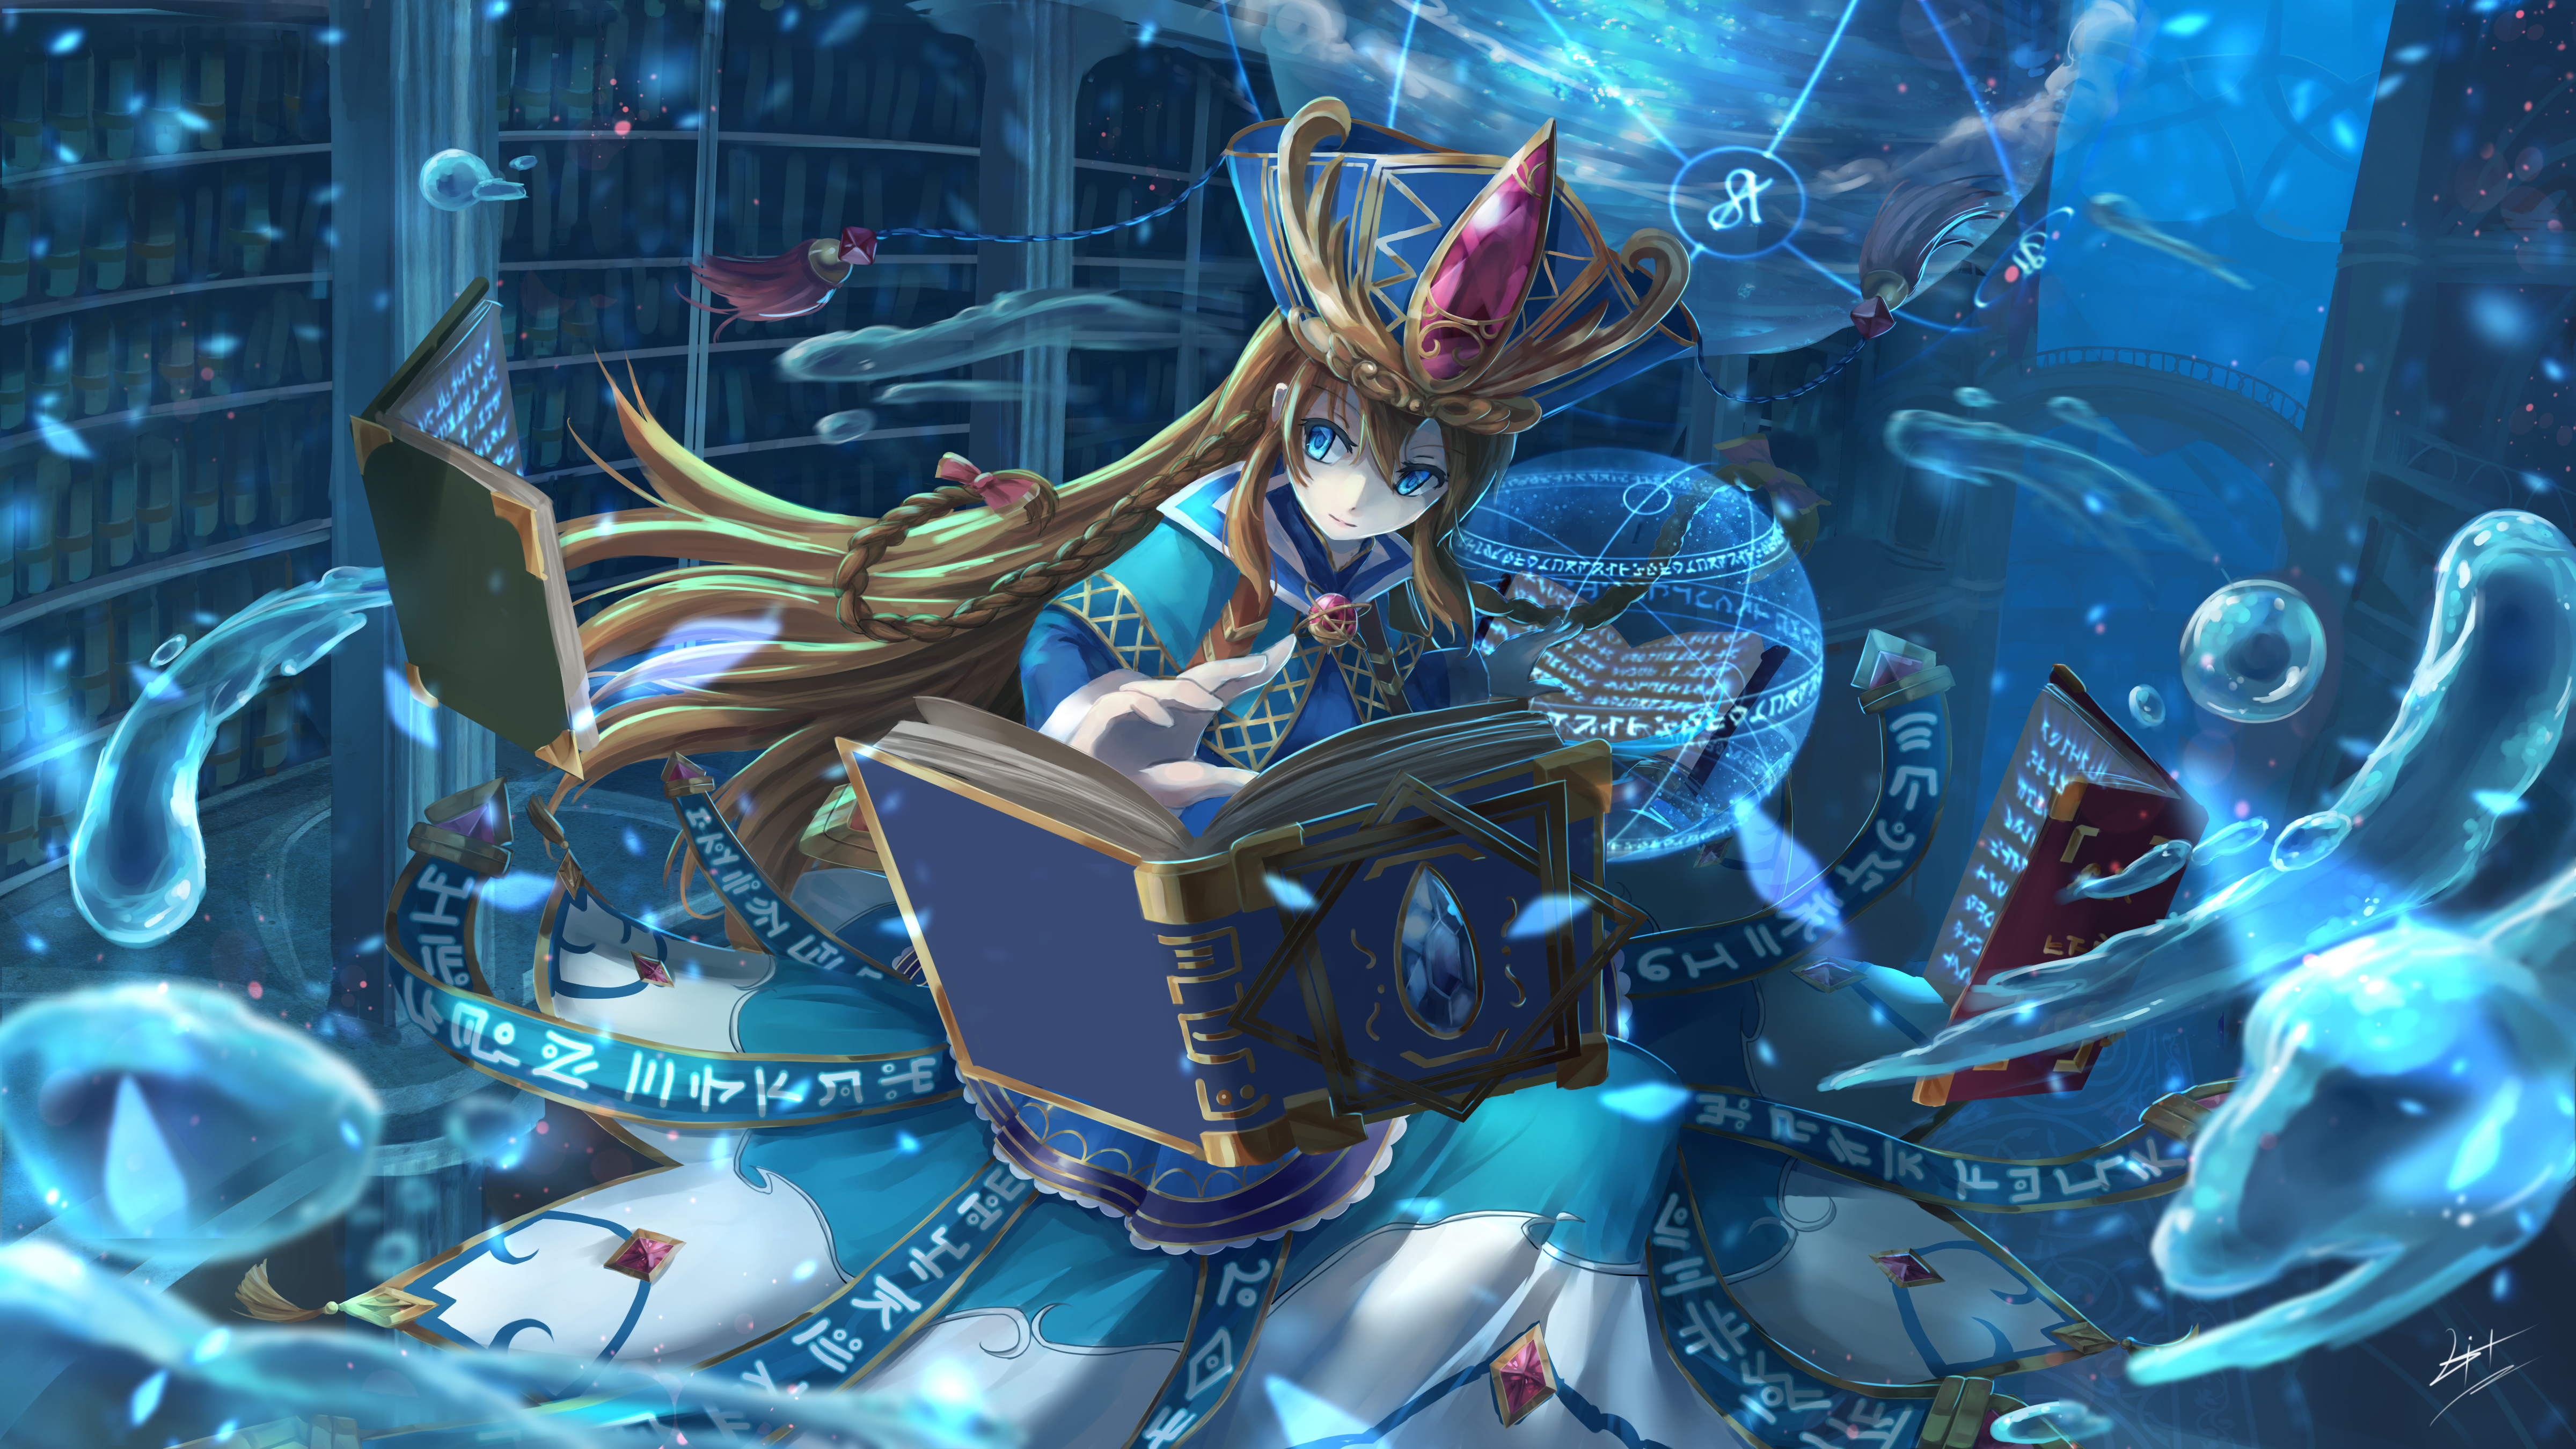 Wallpaper Brave Frontier, Magic, Library, Water Drops, Dress, Anime Style Games